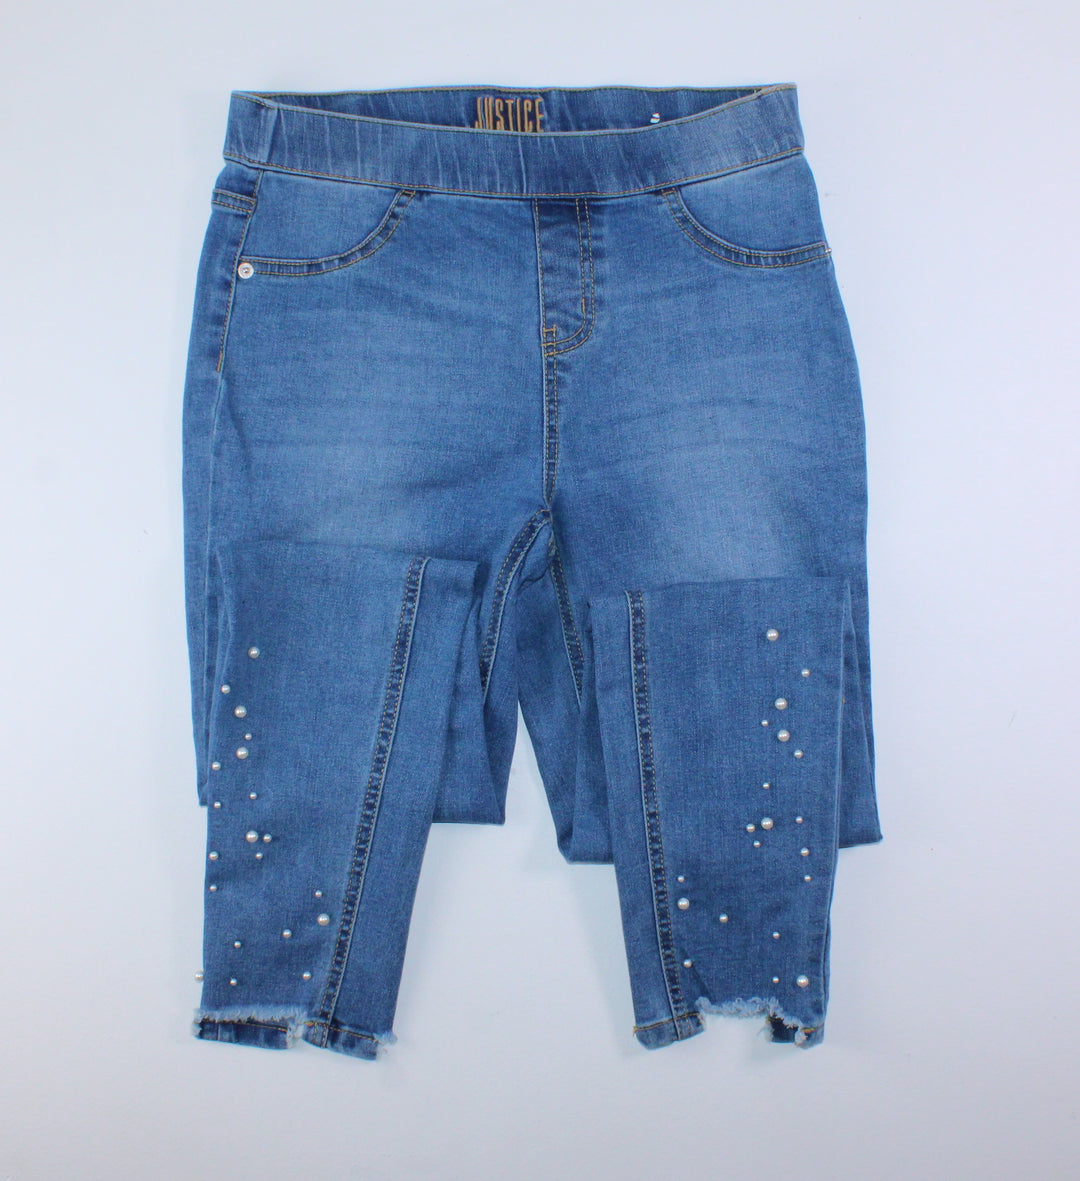 JUSTICE JEWELLED JEANS 16Y EUC